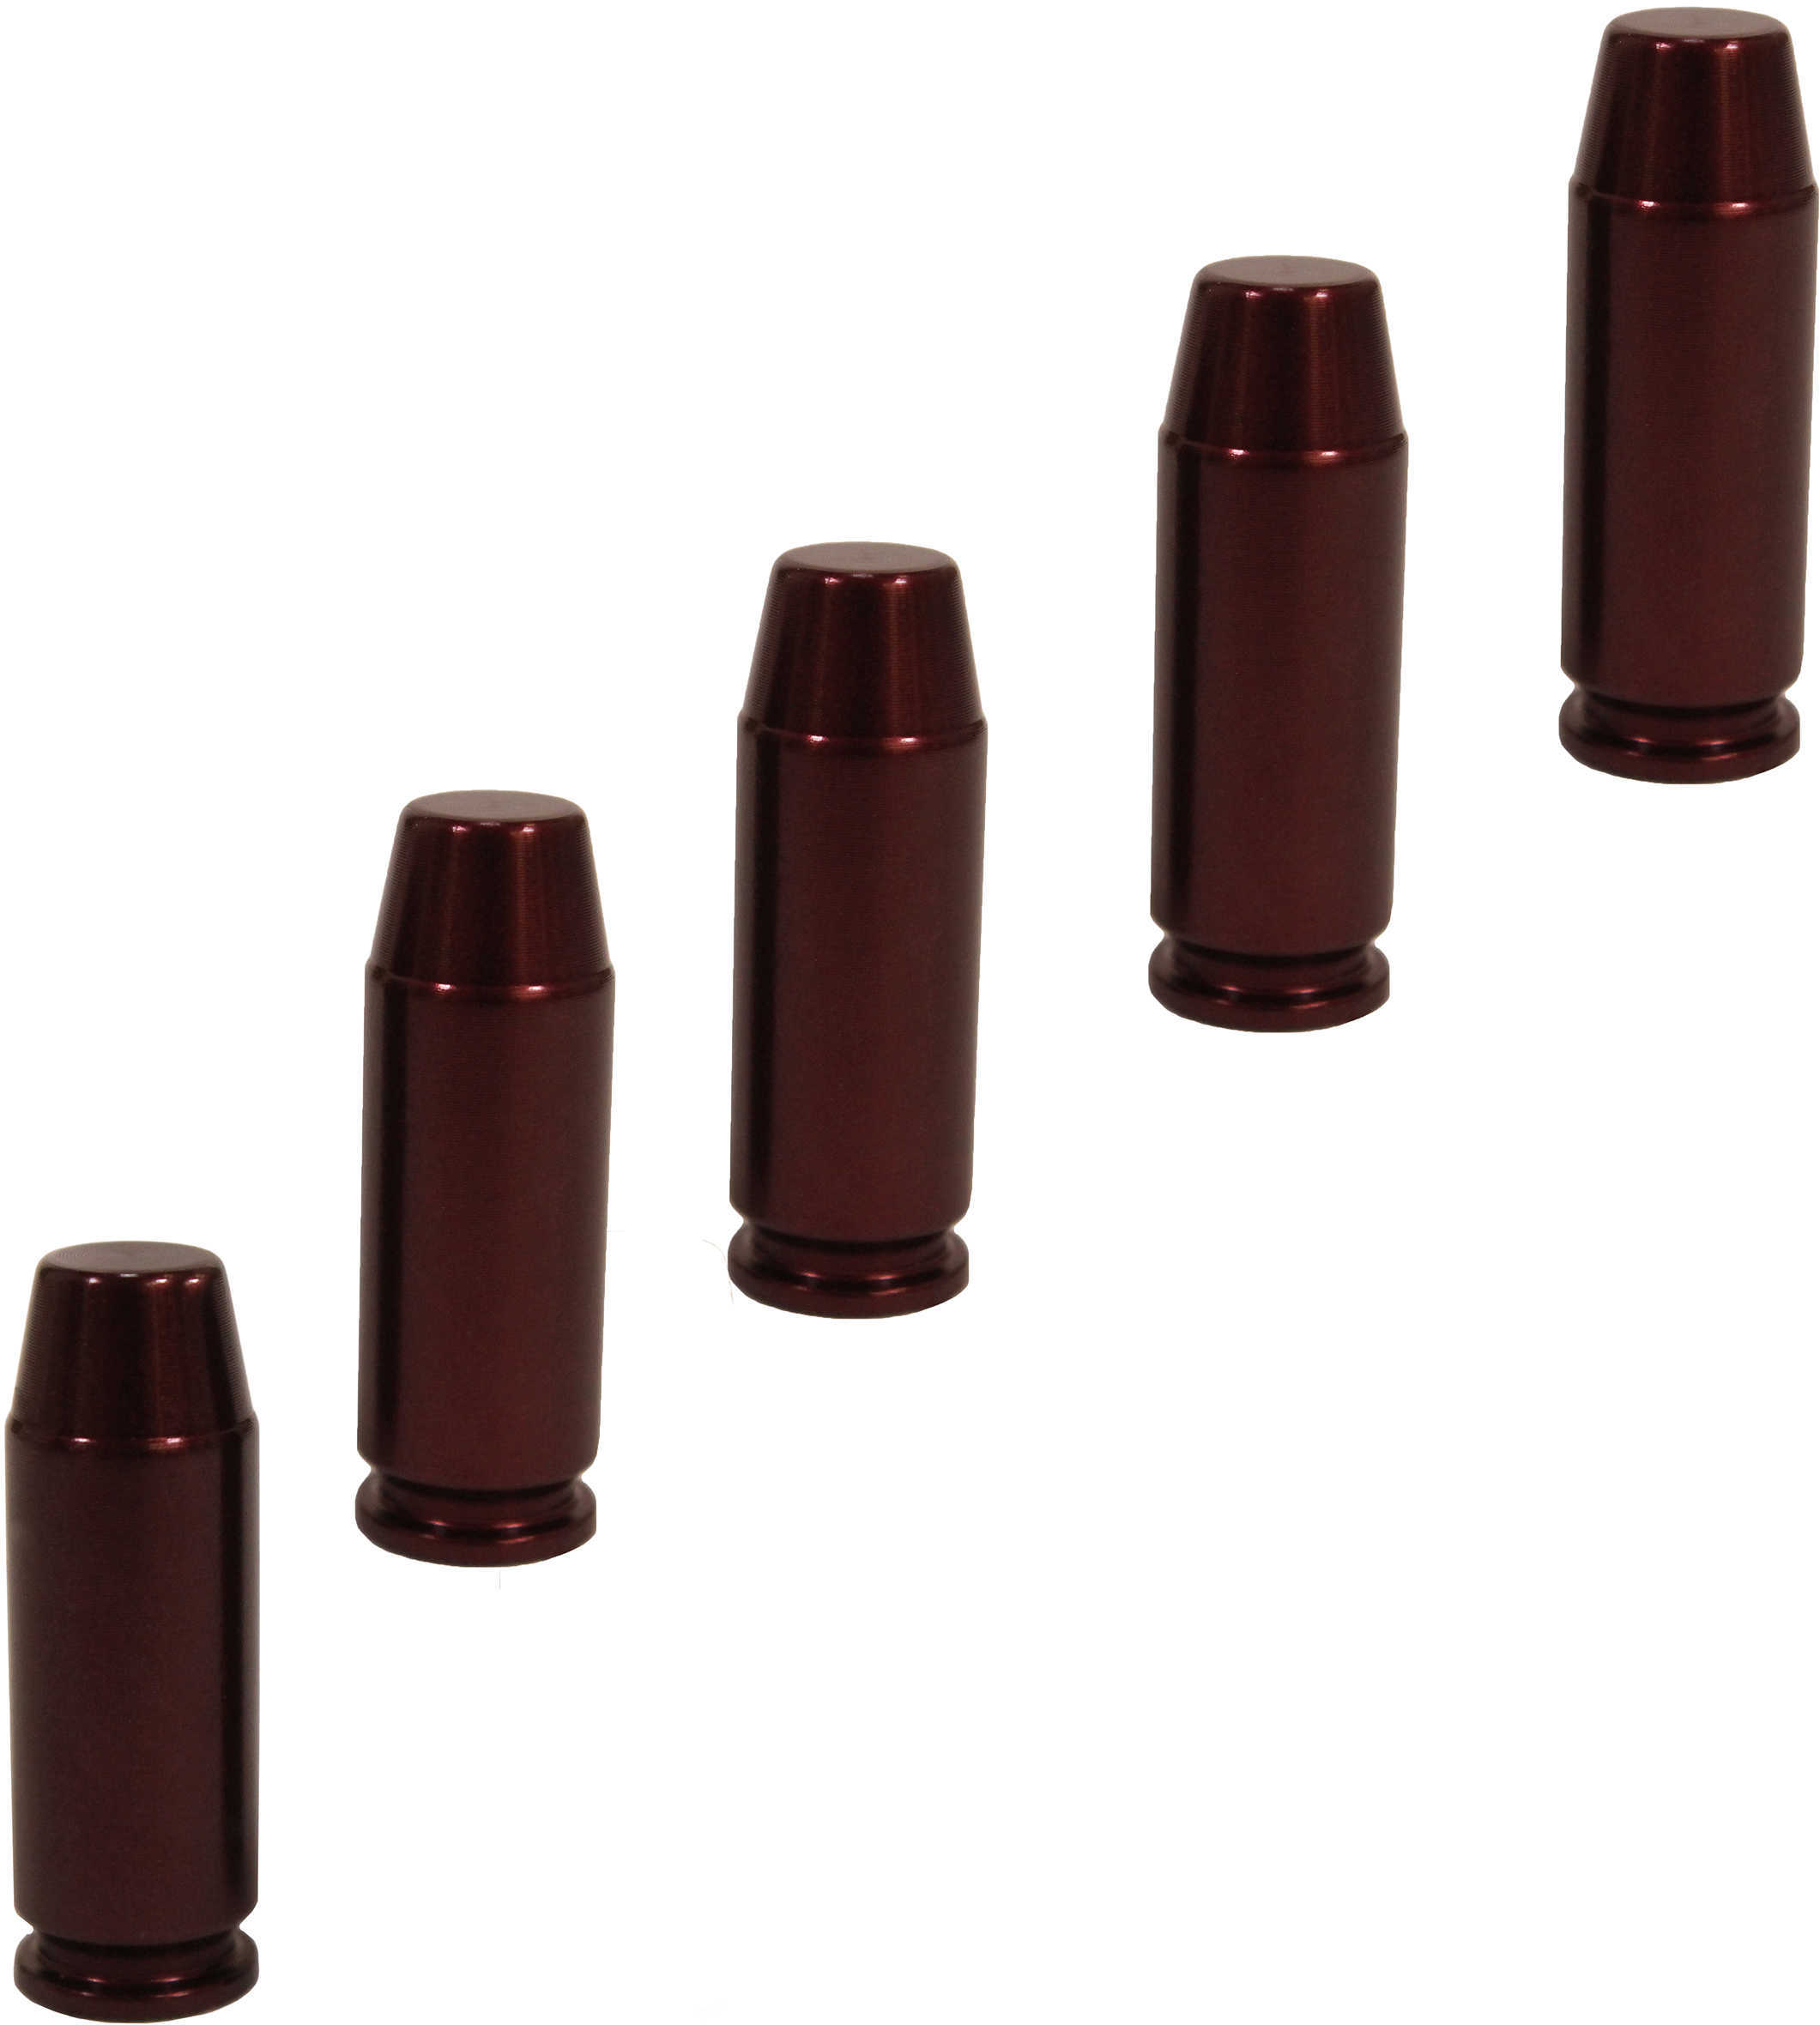 A-Zoom Precision Metal Snap Caps 10mm Auto, 5 Per Pack For Safety Training, Function Testing Or safely decocking Without